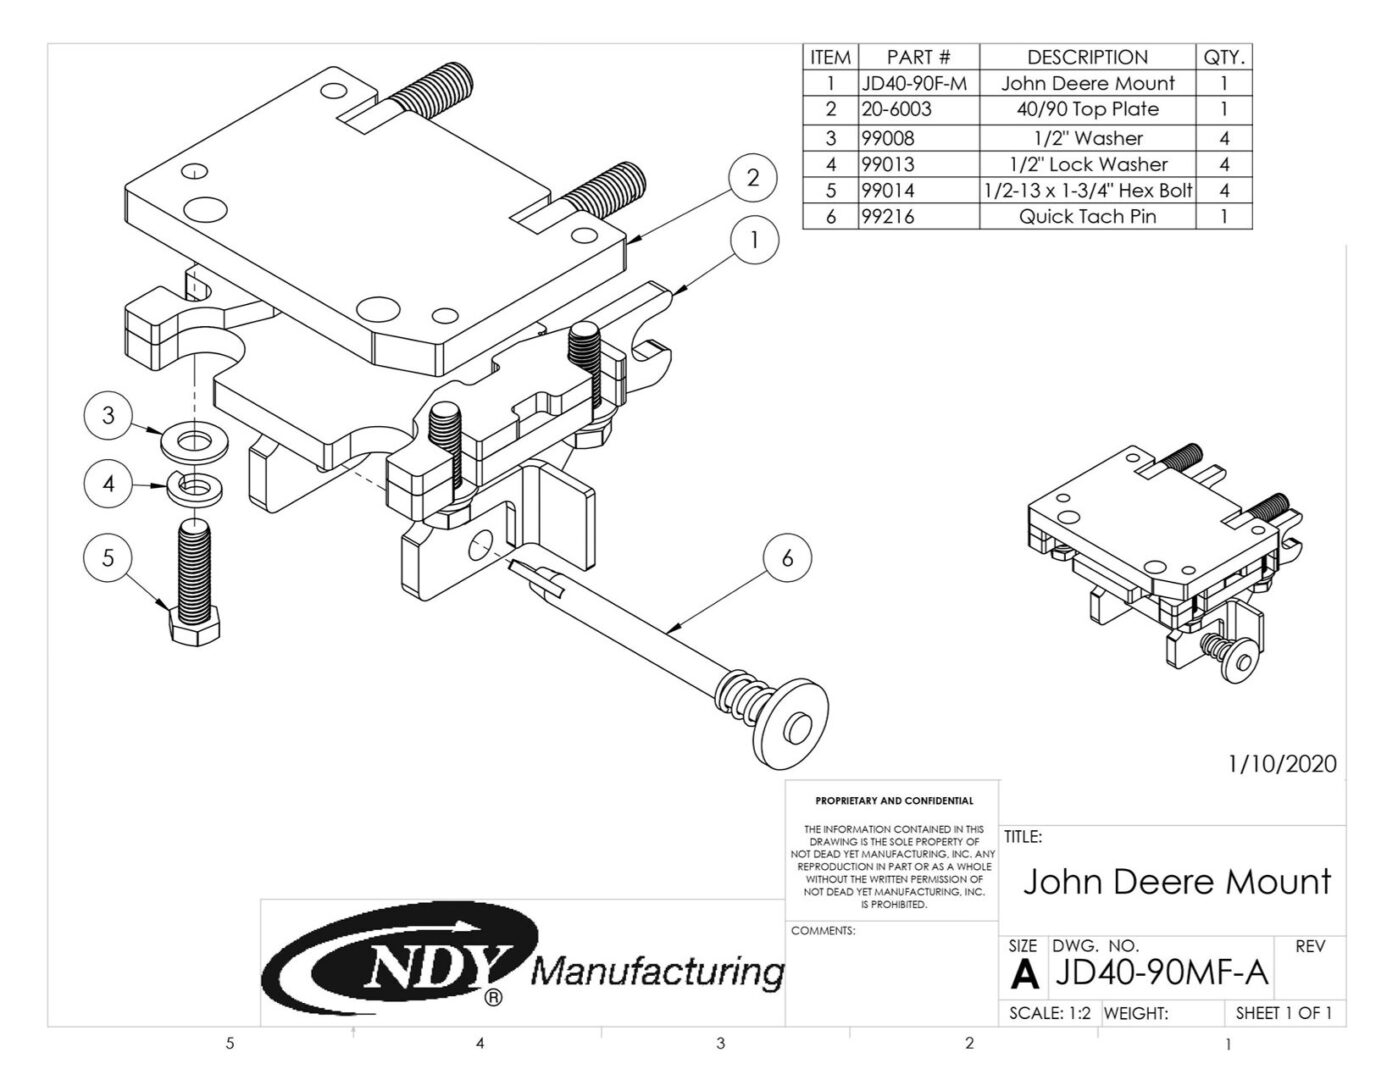 A diagram showing the parts of a Stalk Stomper Mount for Row 3 and 10 on John Deere 1243/1293 Series Corn Head mower.